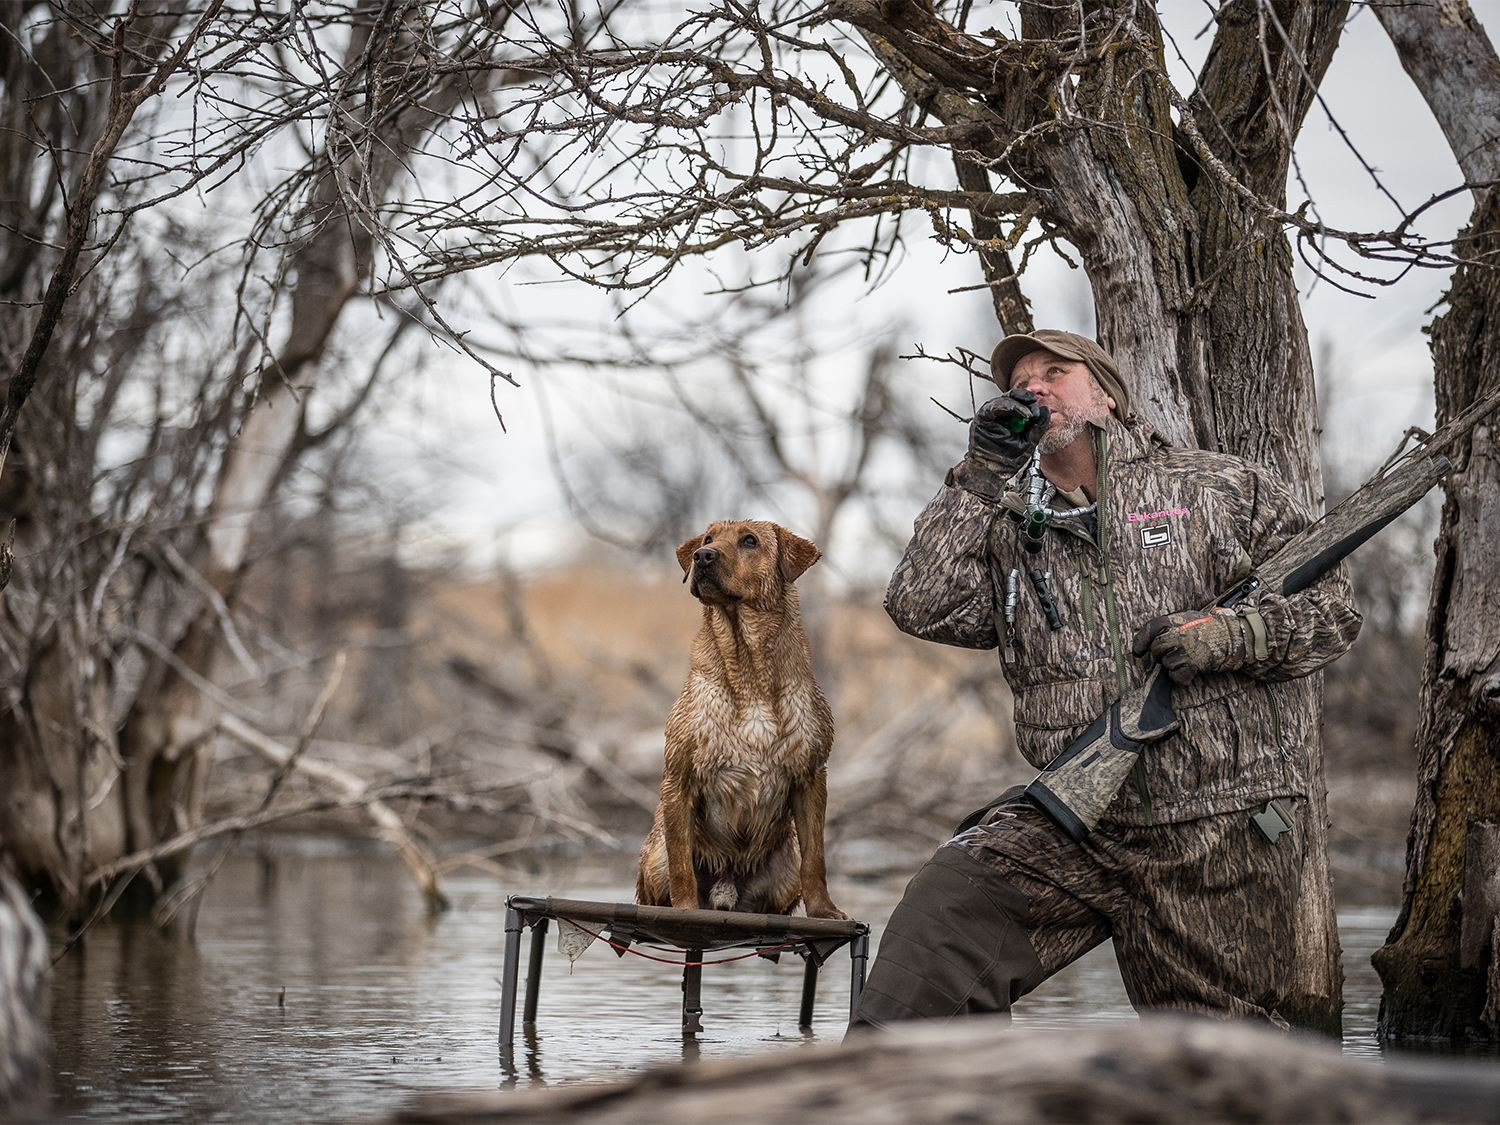 A hunter wading in the water on a duck call.